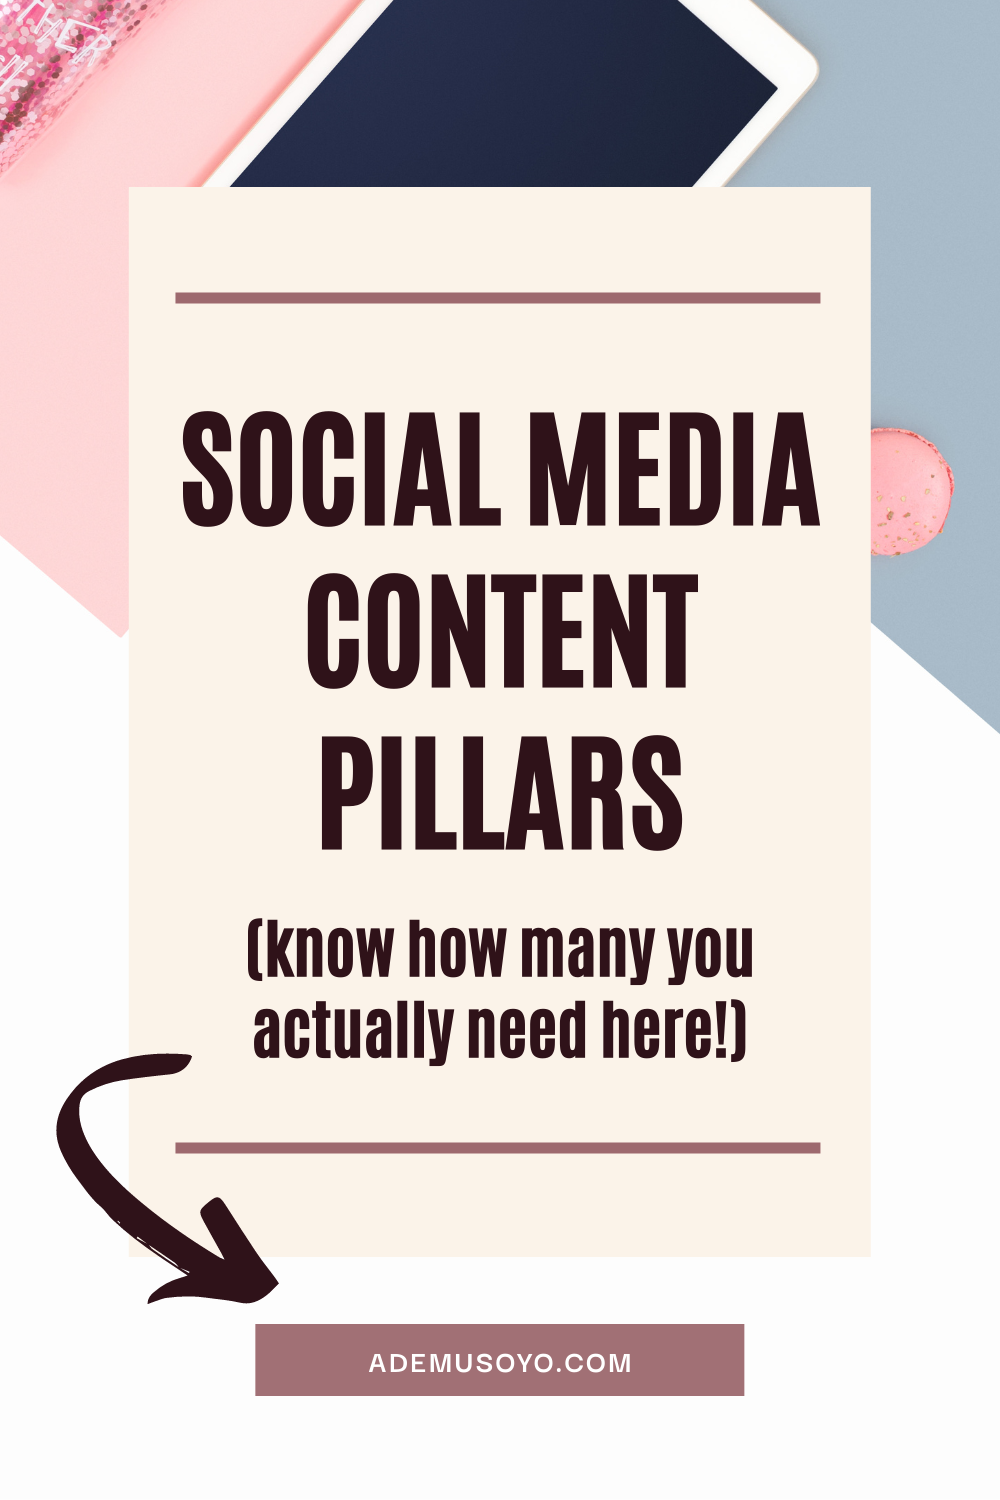 How Many Content Pillars For Social Media Do You Need, what is a content pillar, what are the 5 content pillars, examples of content pillars for social media